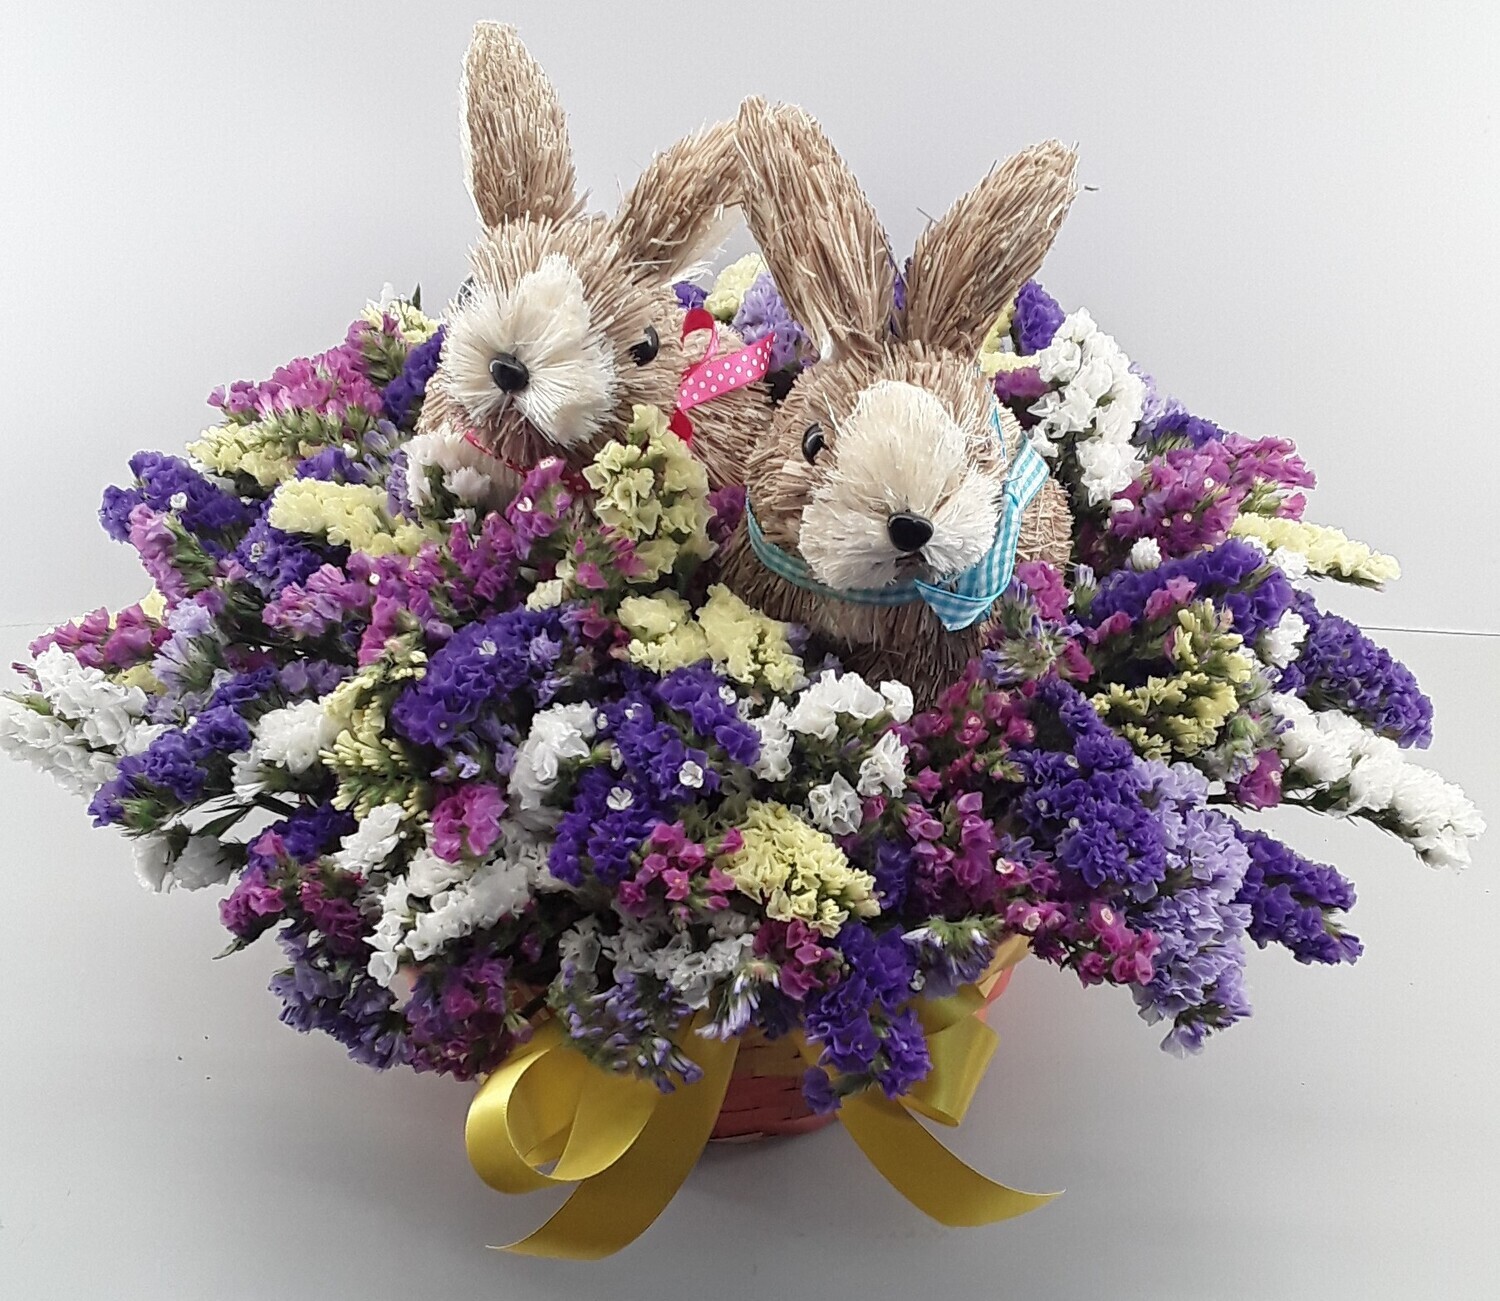 E4--Easter creation with "athanato" in a basket